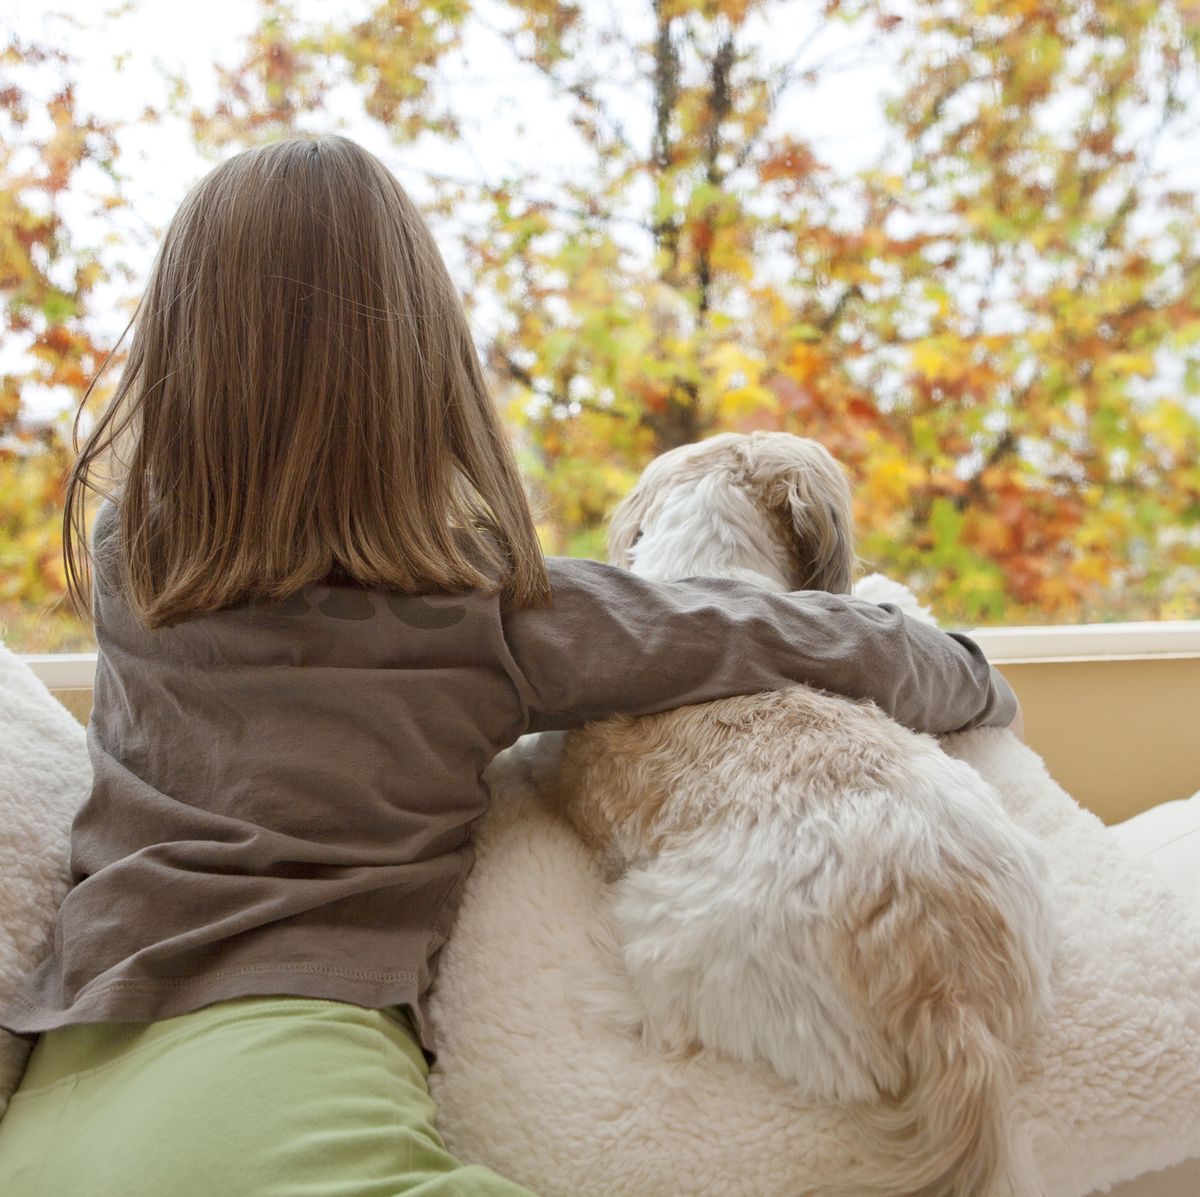 12 Small Dog Breeds Good With Kids: Shih Tzu, Maltese, and More